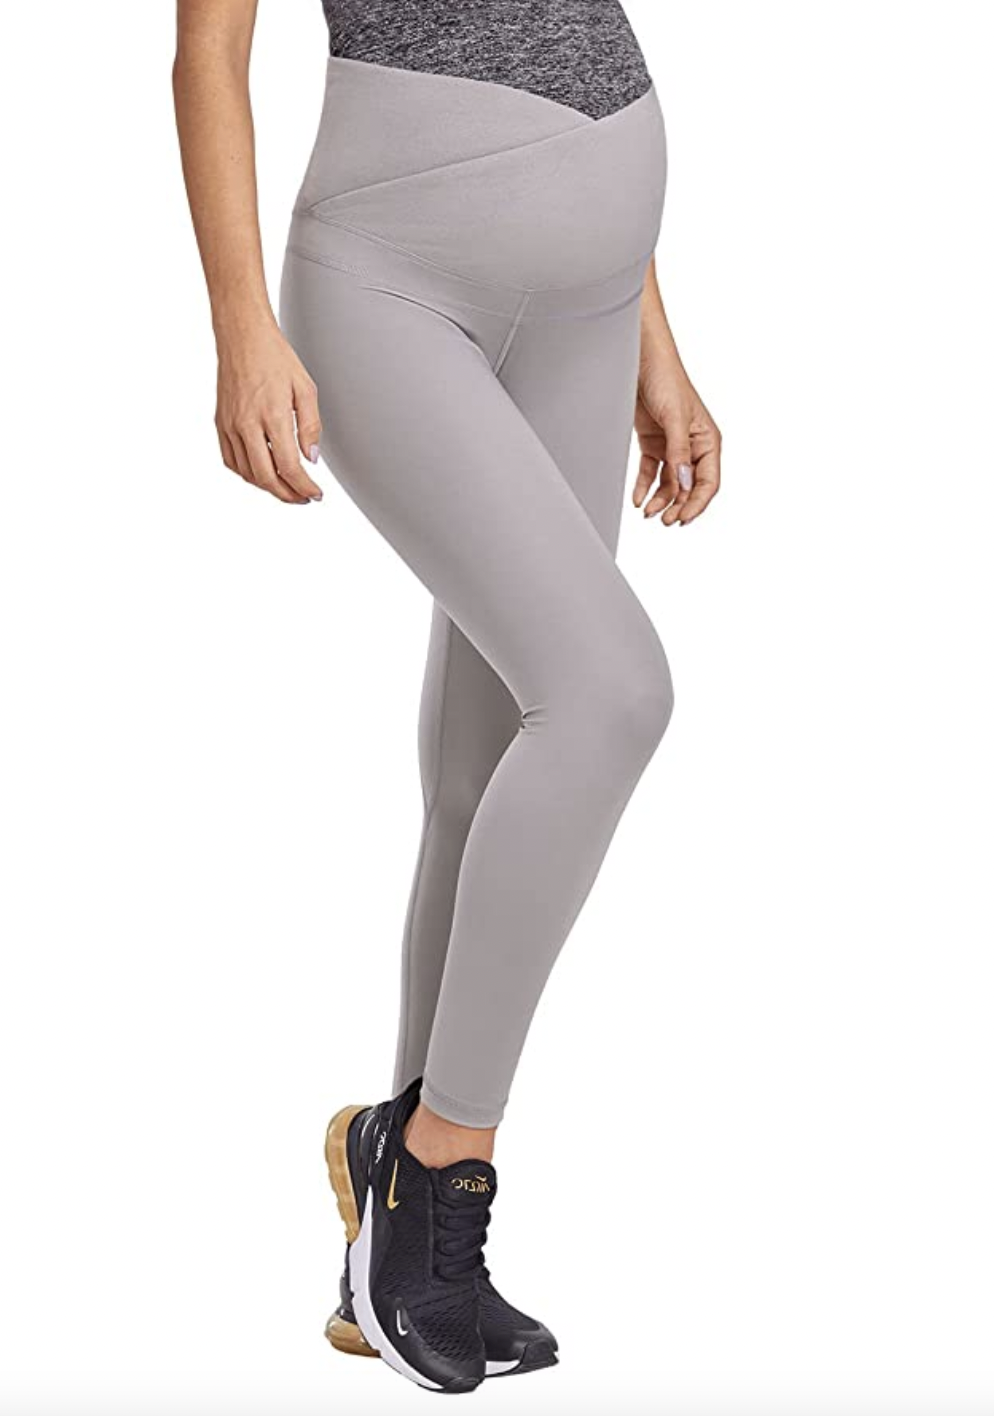 Mother Maternity Leggings Pocket Yoga Sports Trousers Stretch Pregnancy Pa#he6